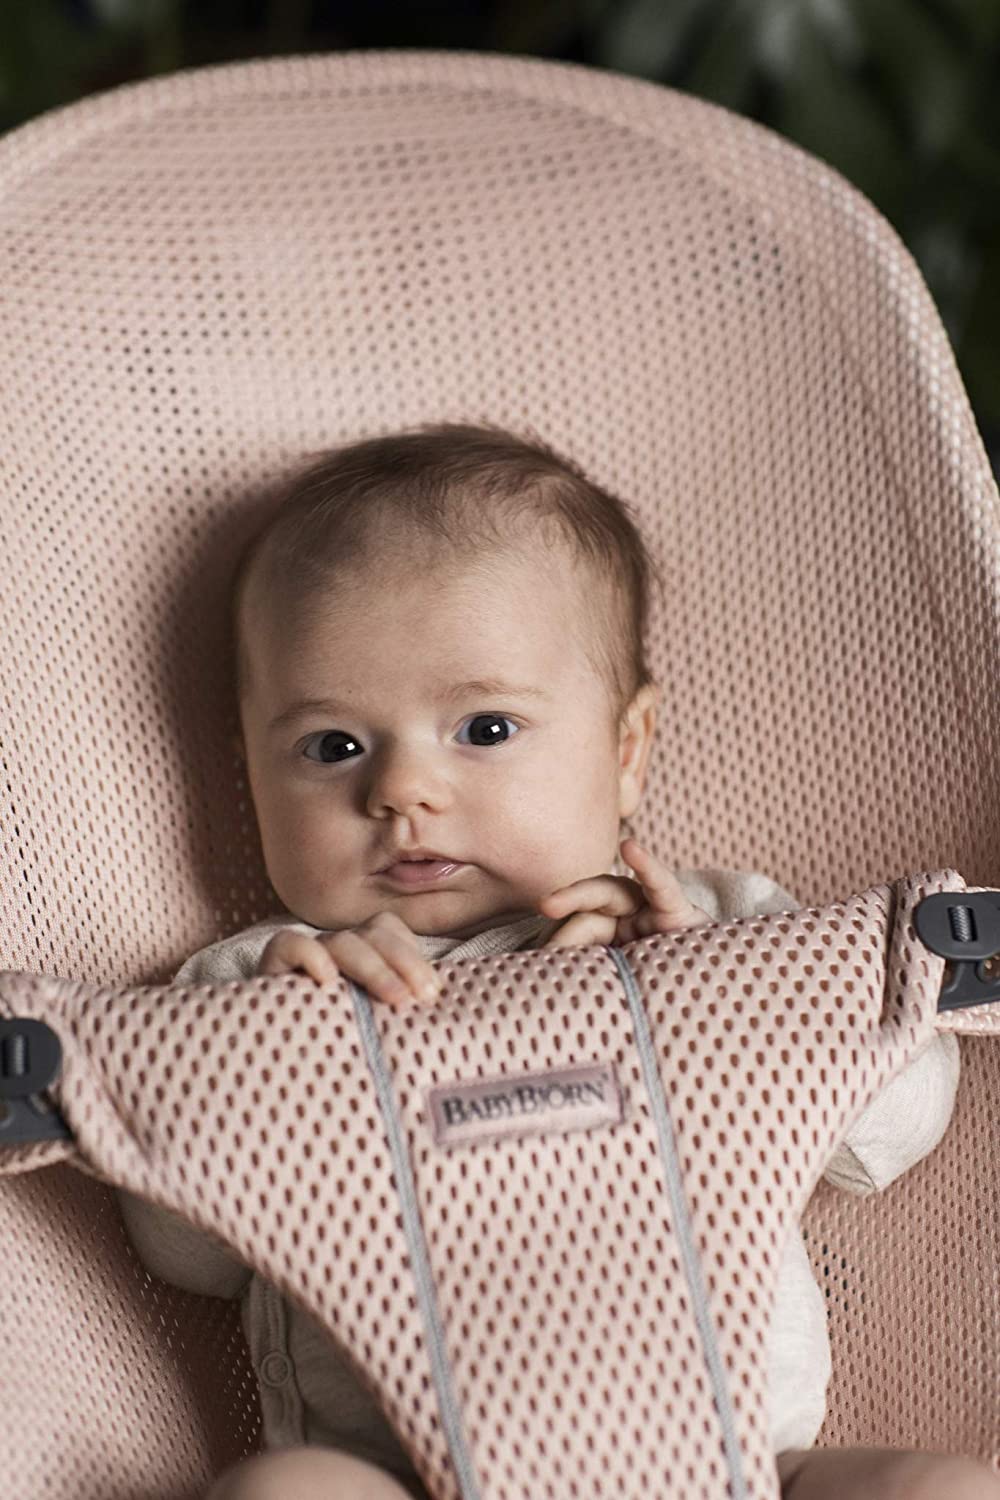 BabyBjörn Bouncer Bliss, Mesh, Pearly Pink